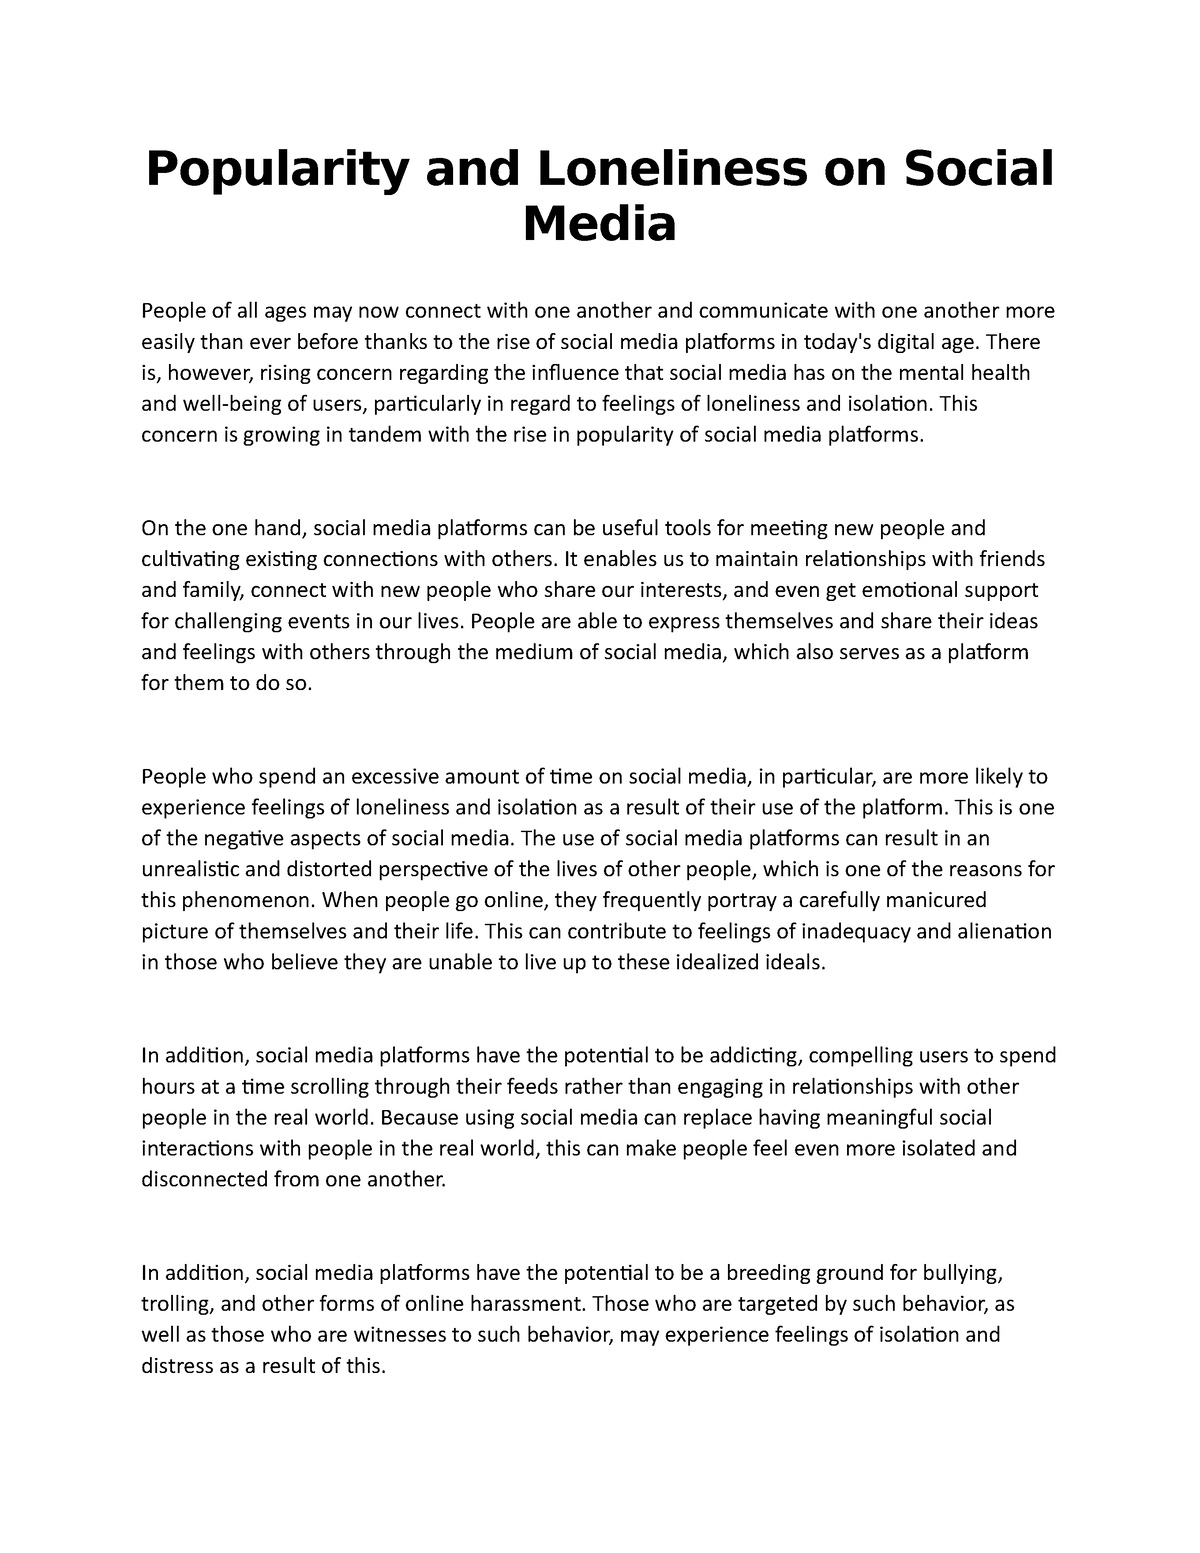 social media and loneliness essay